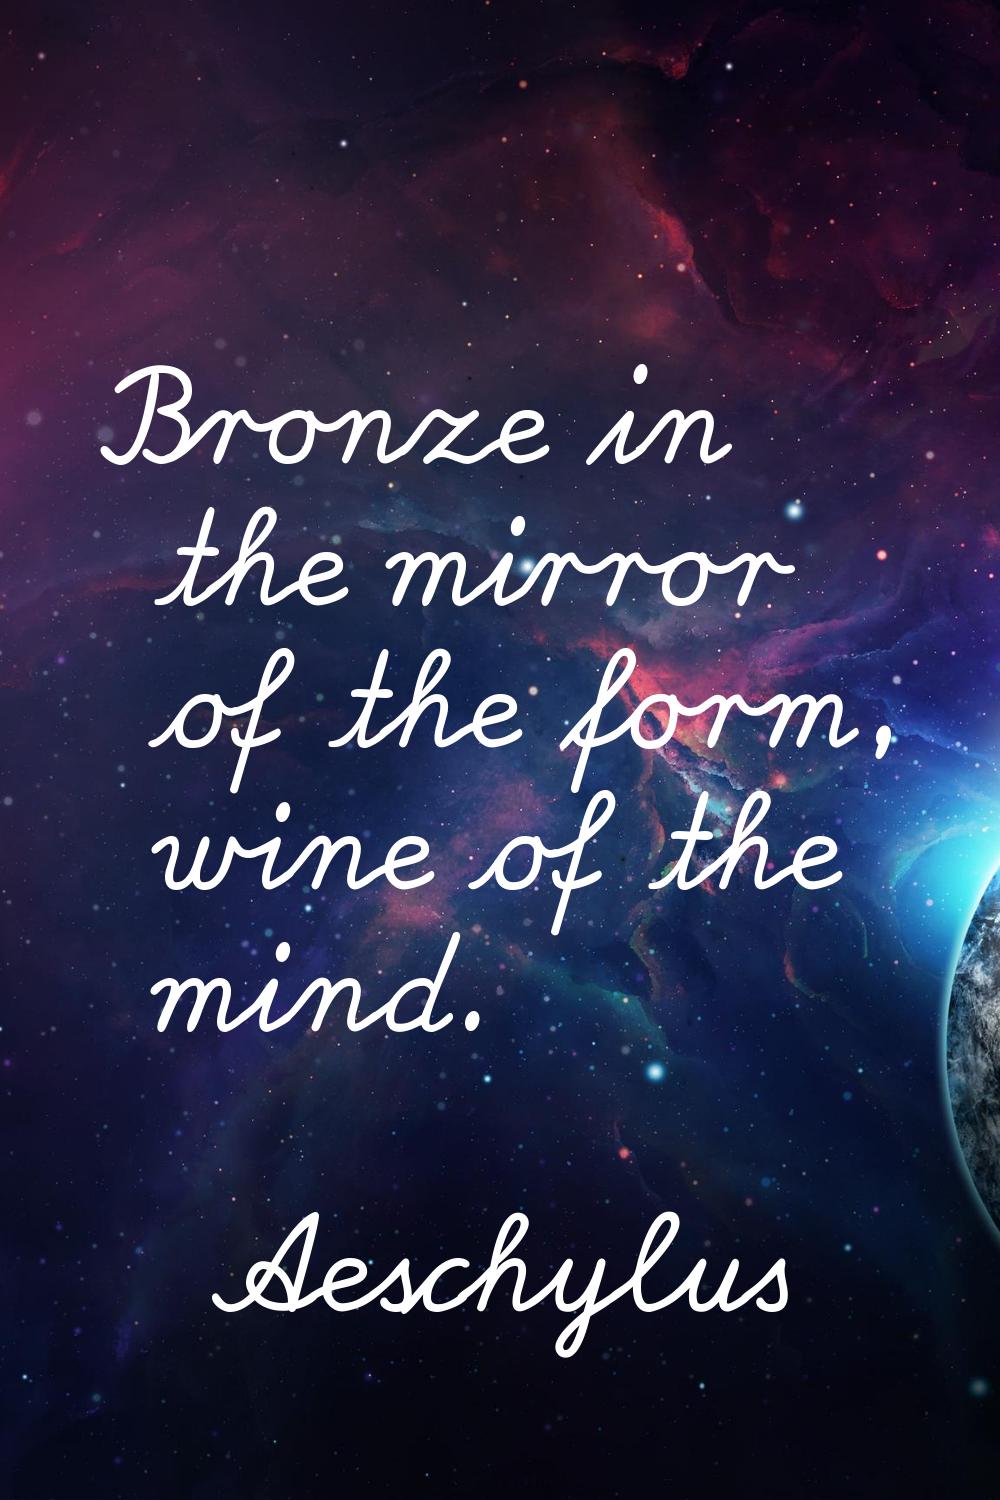 Bronze in the mirror of the form, wine of the mind.